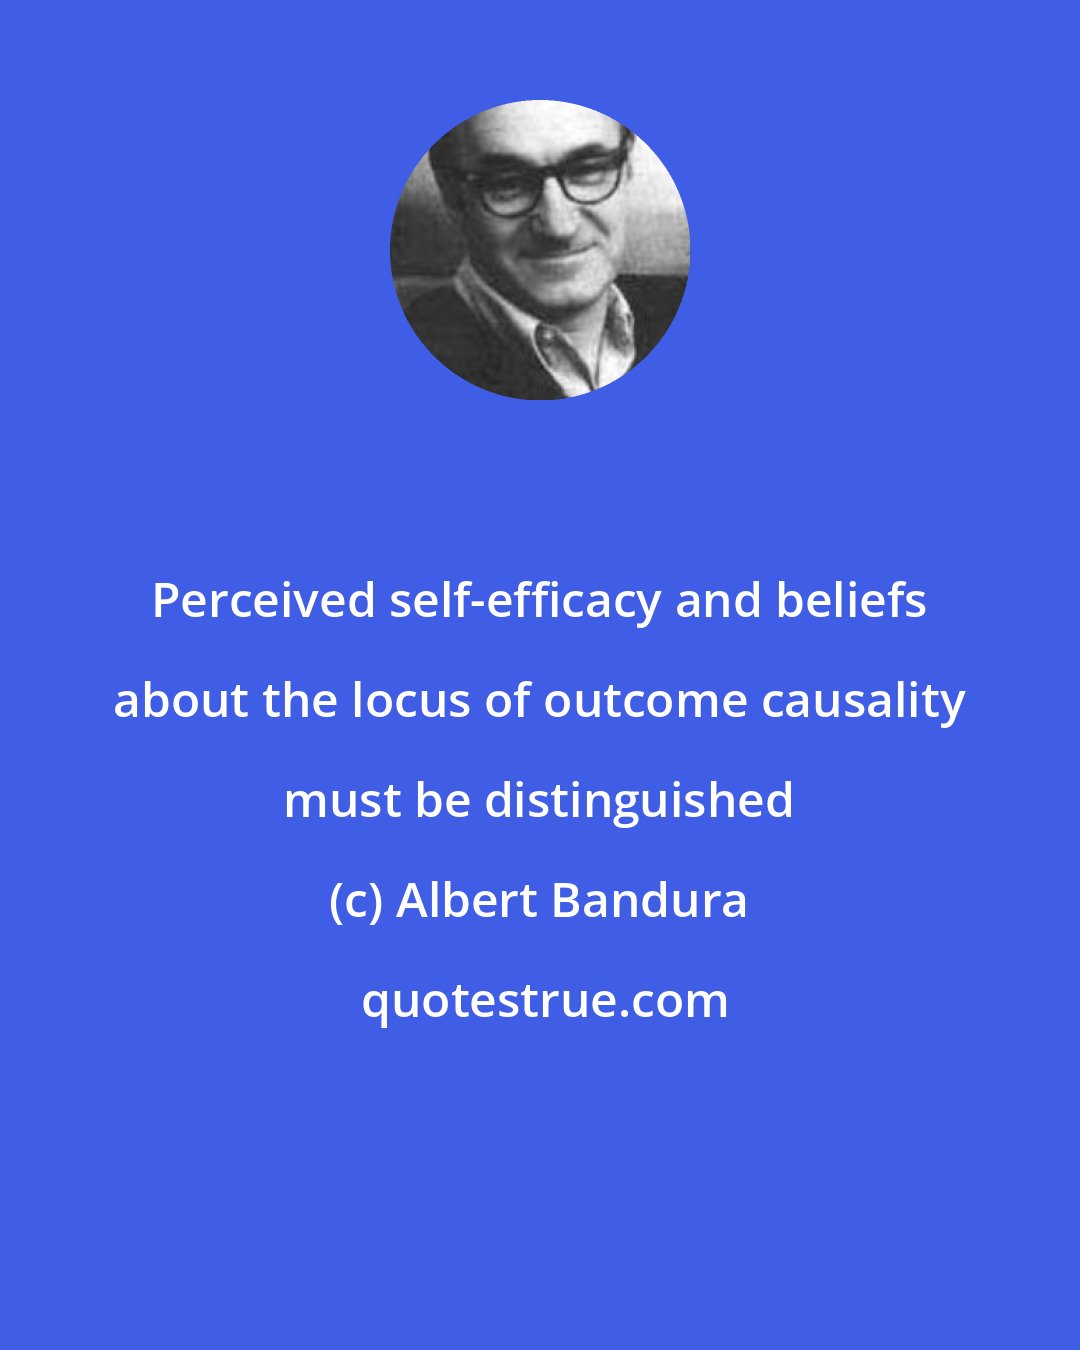 Albert Bandura: Perceived self-efficacy and beliefs about the locus of outcome causality must be distinguished